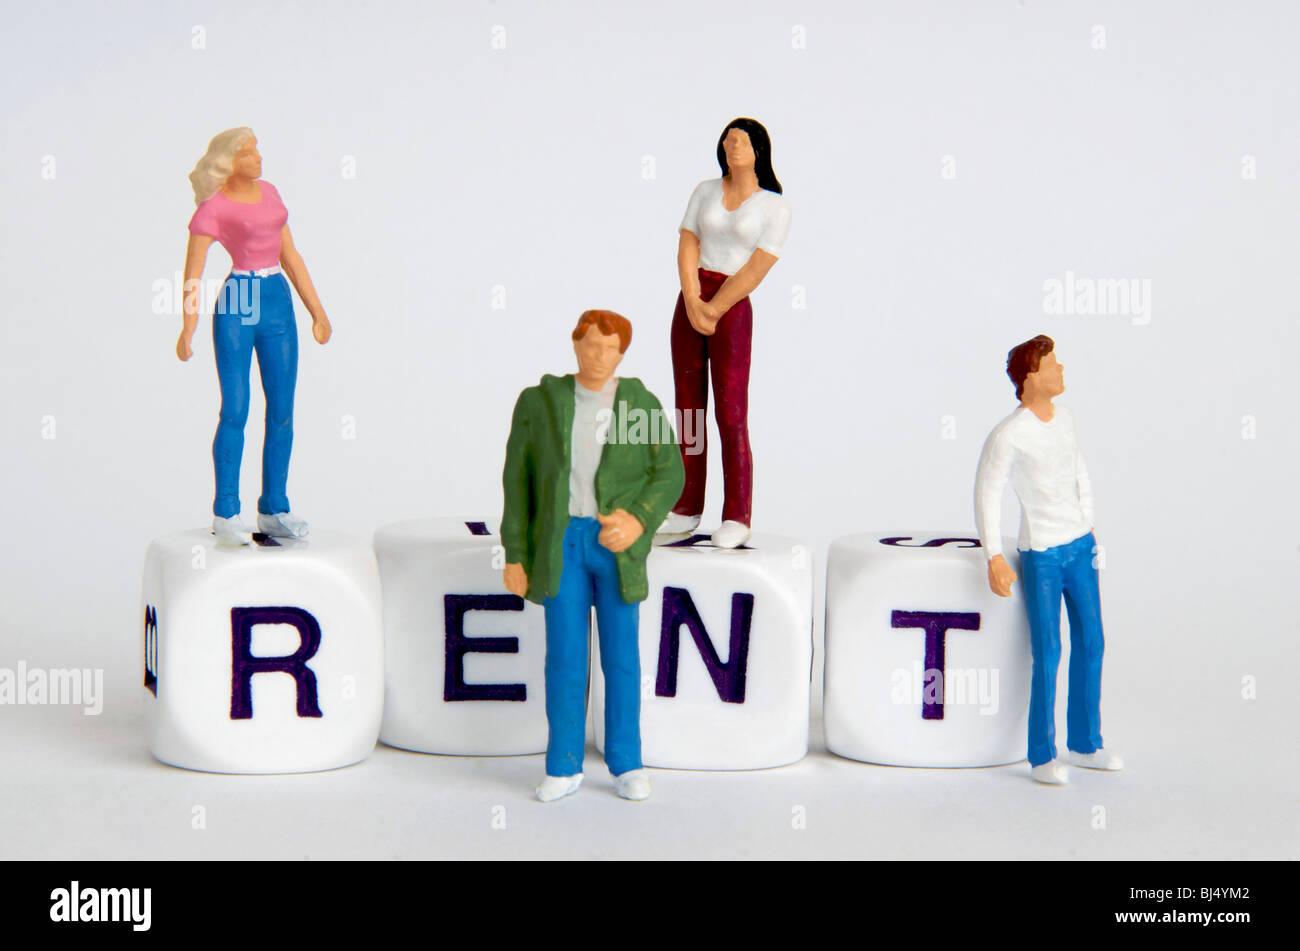 Students / young people housing / rent / university costs / tenancy concept Stock Photo